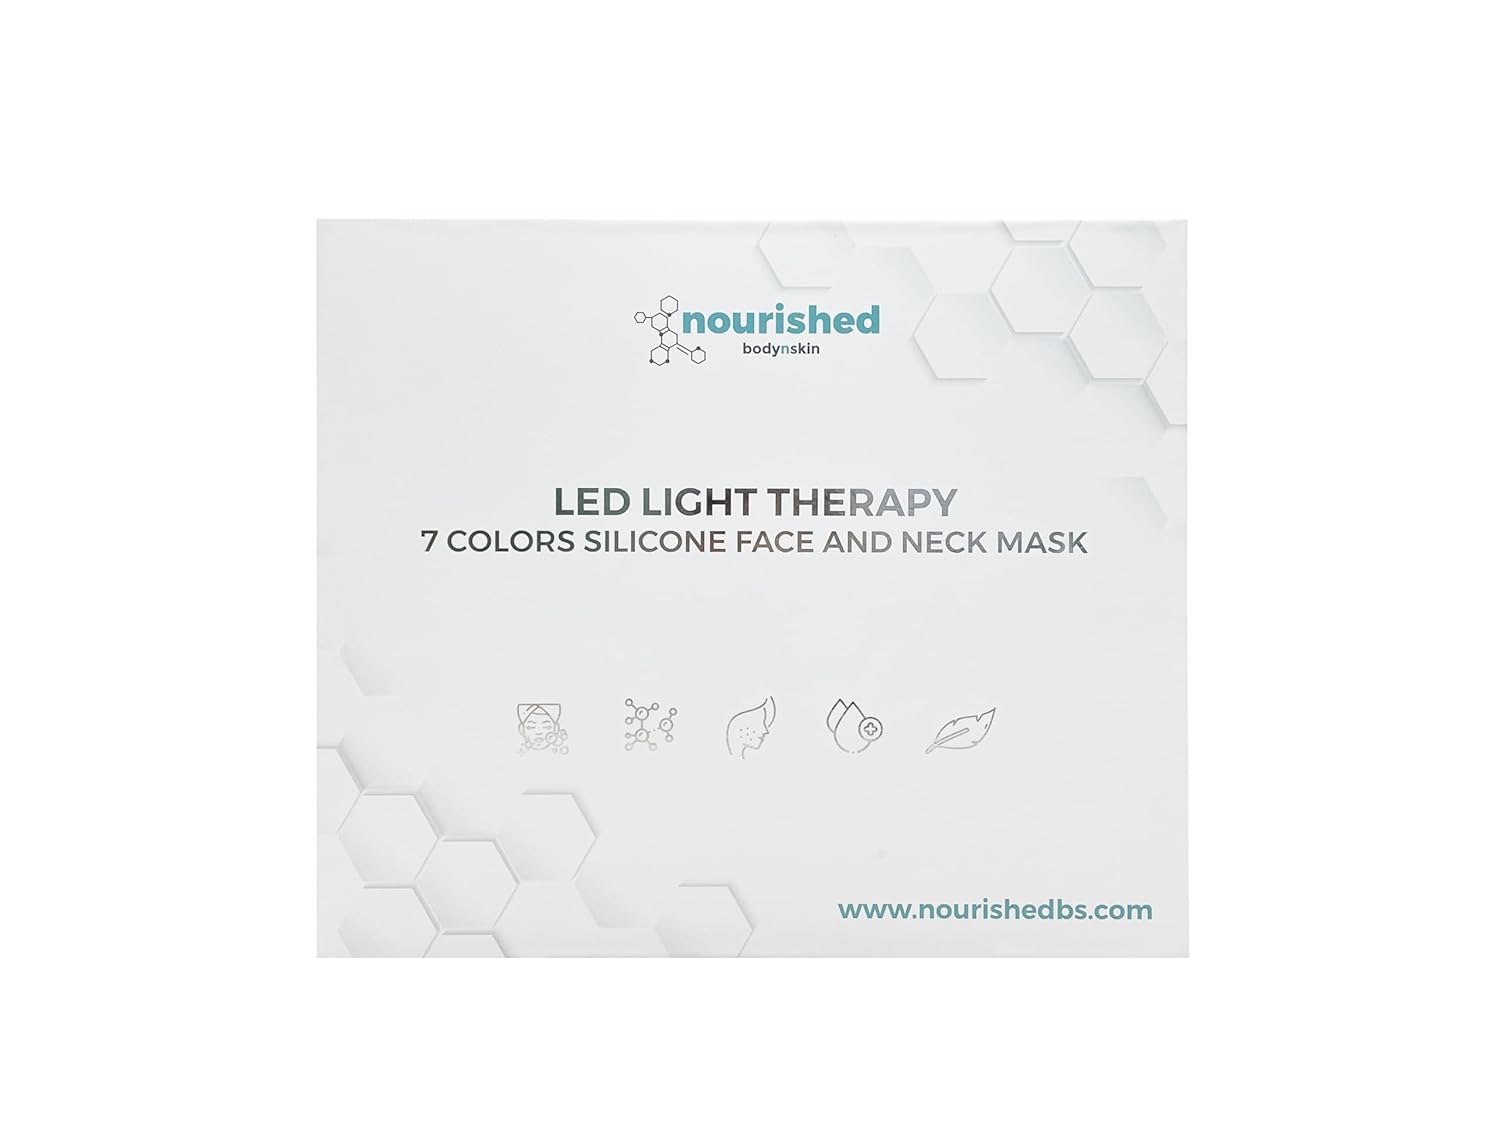 LED Light Therapy Face  Neck Mask - Facial Skin Care Device - 7 Colors Red  Blue - Rejuvenation, Anti-aging Product for Wrinkles